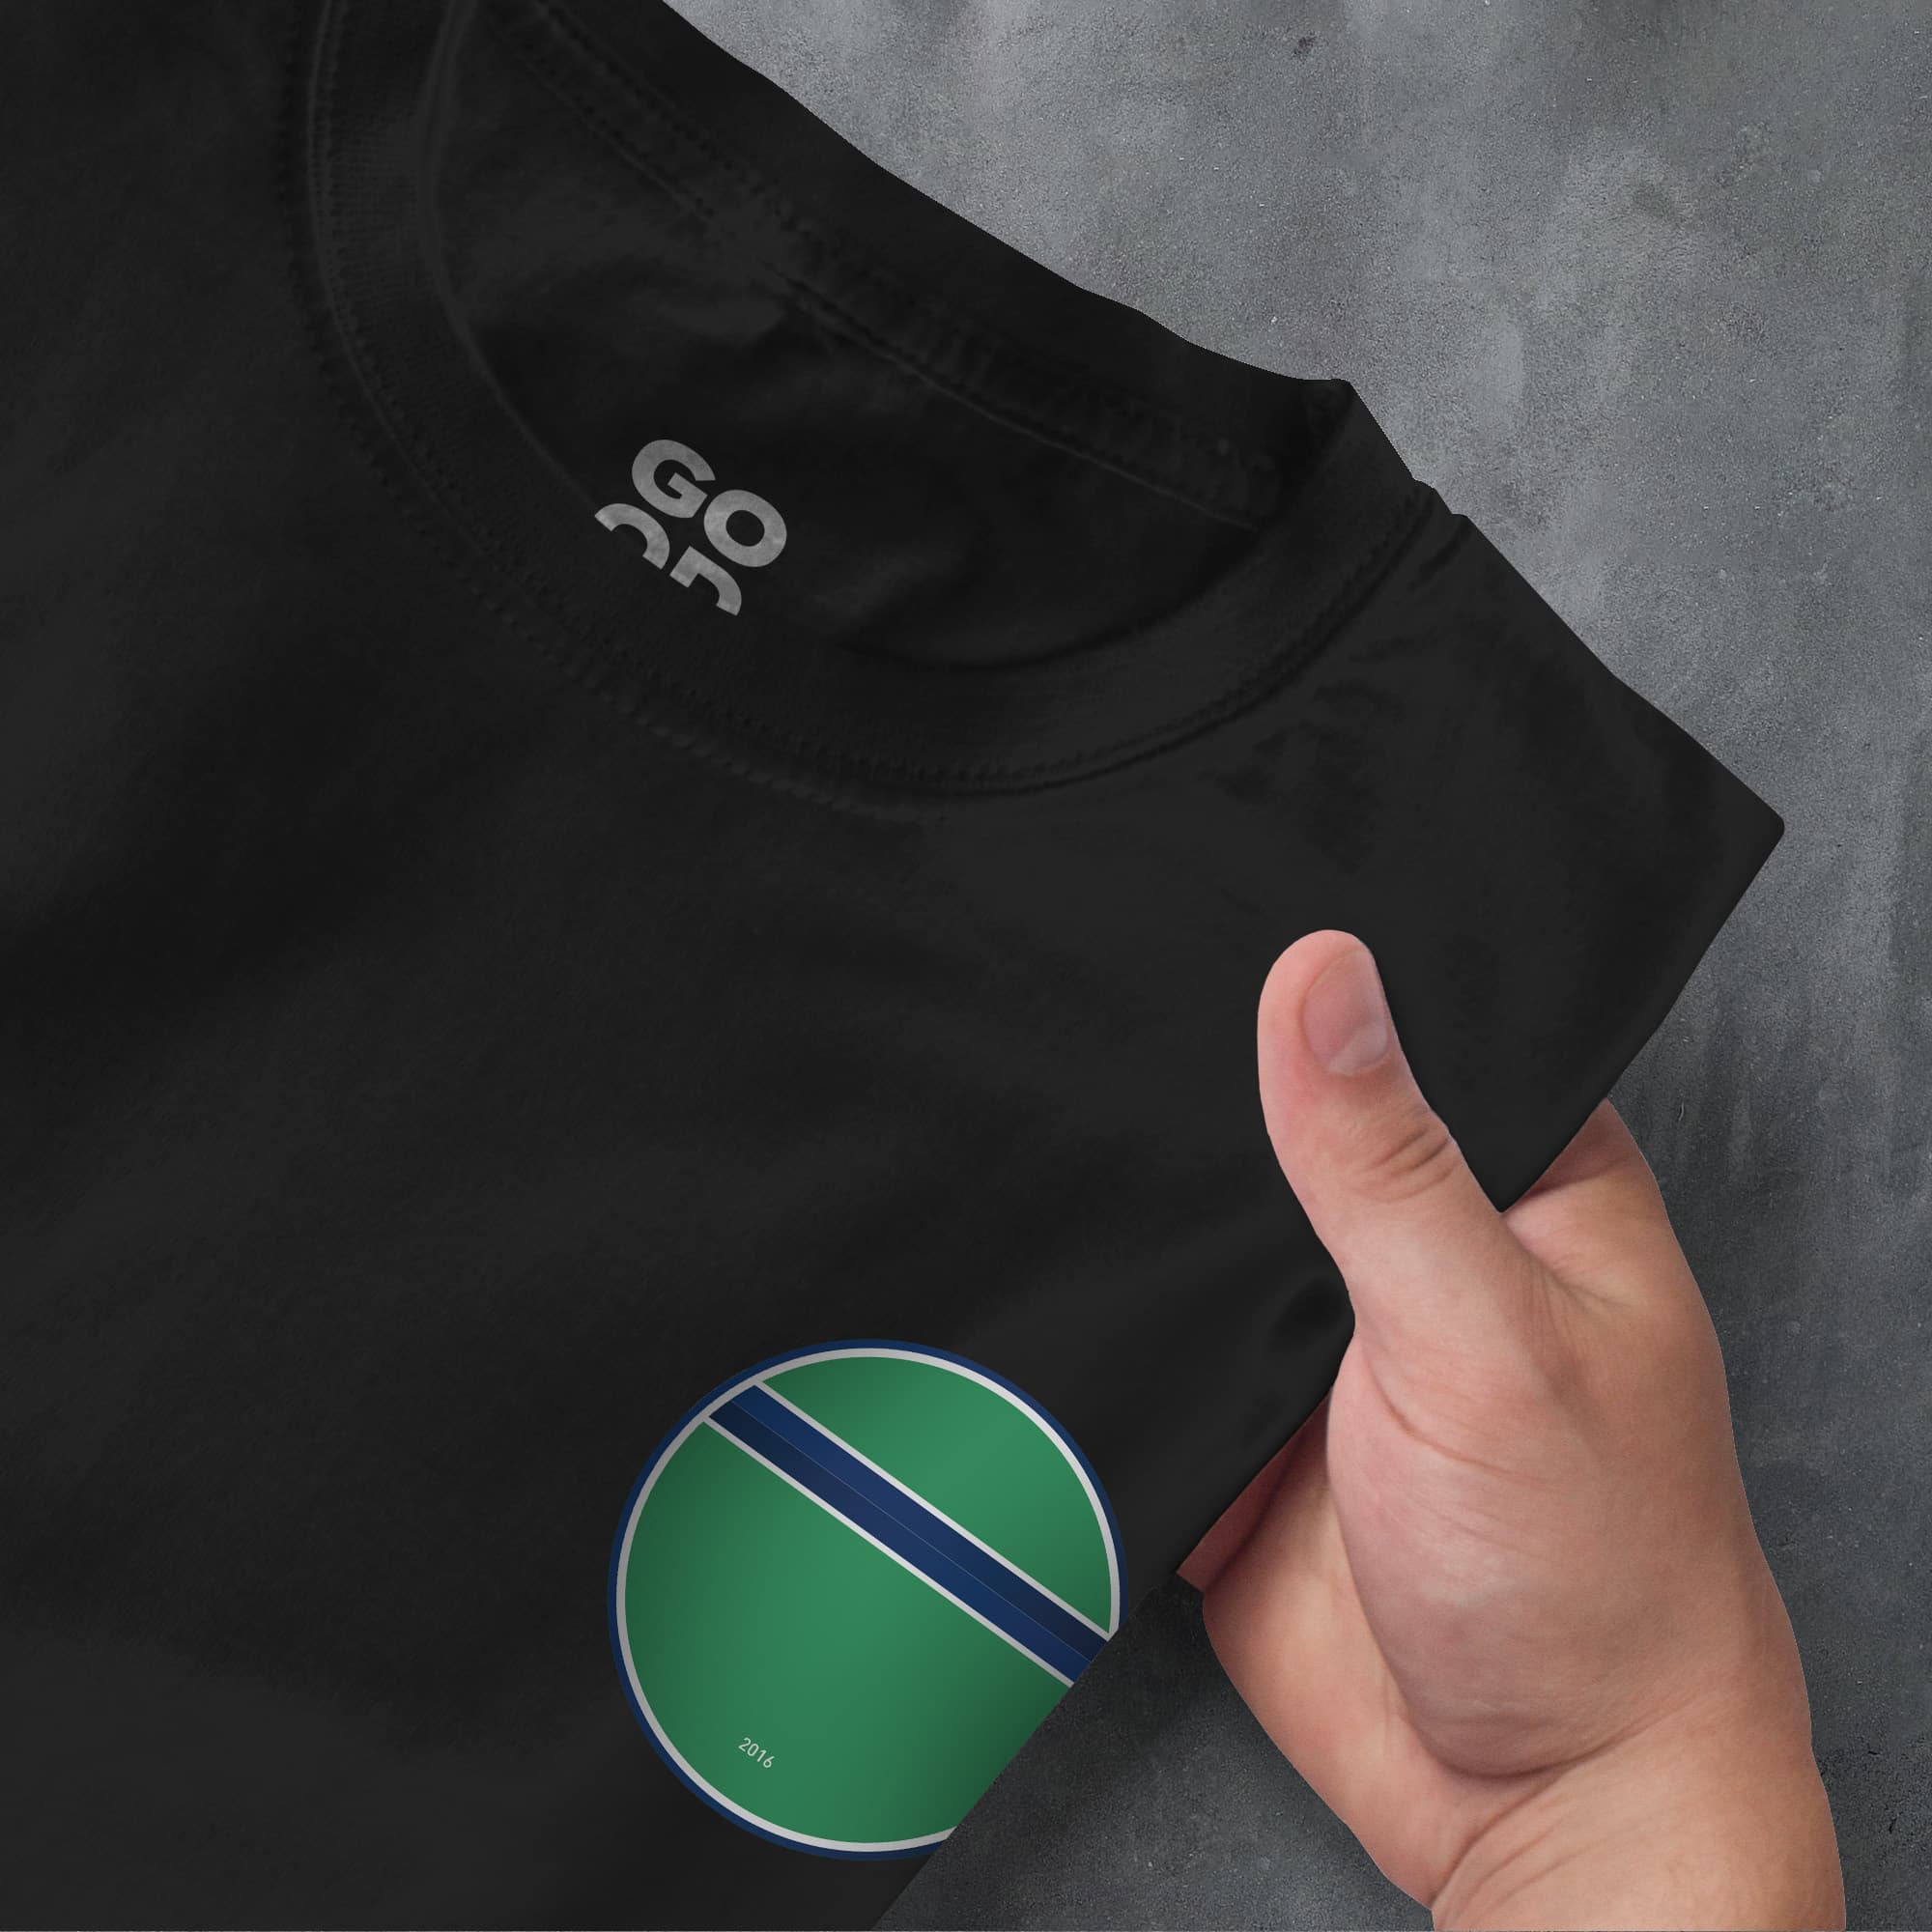 a person's hand pointing at a black shirt with a green and blue stripe